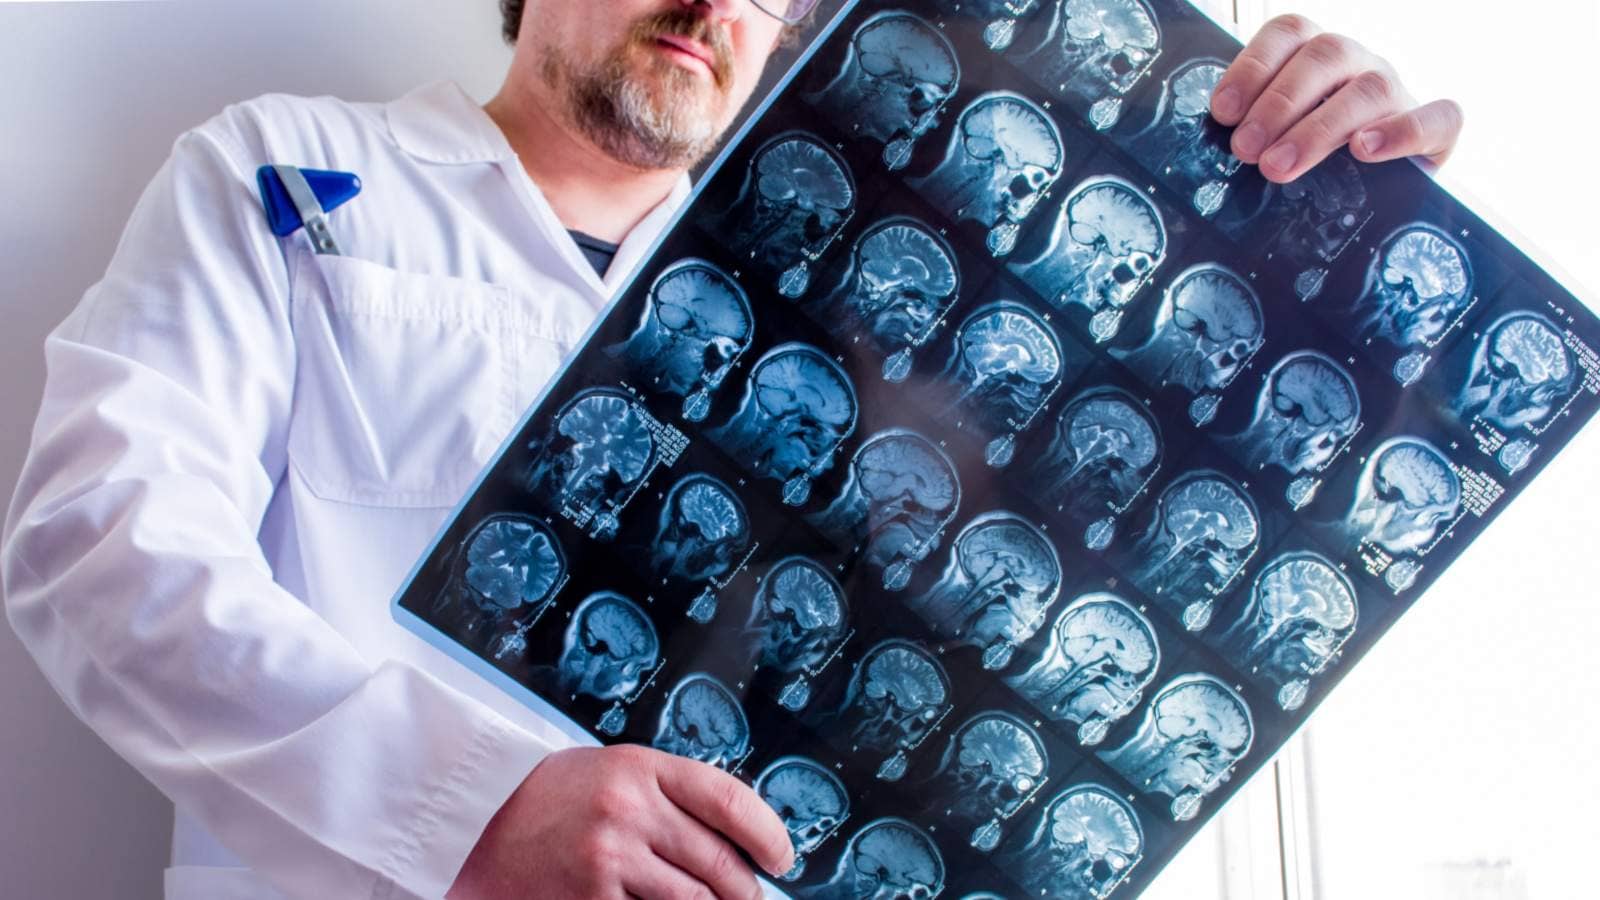 Doctor examines MRI scan result of the head